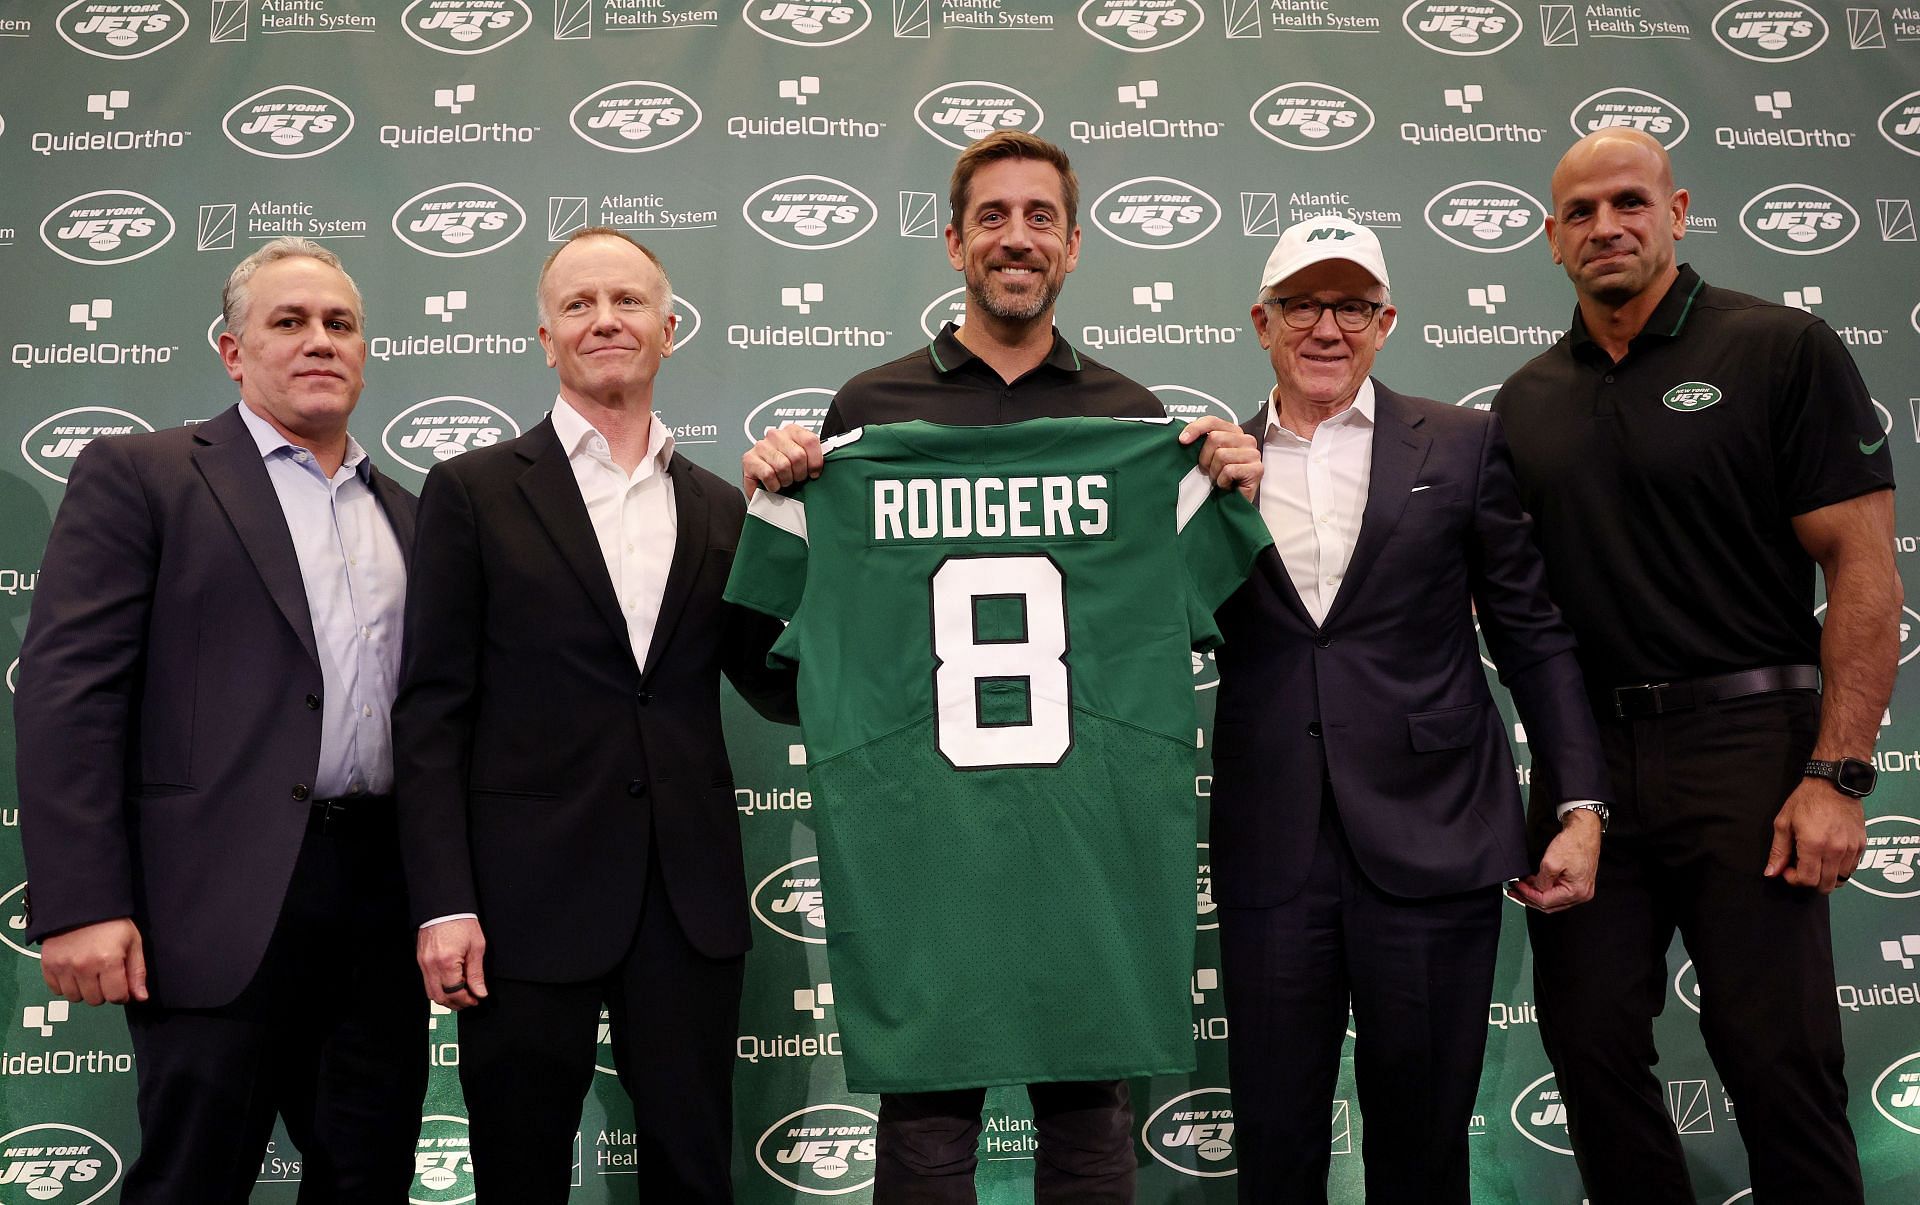 The Jets introduced their new quarterback in April